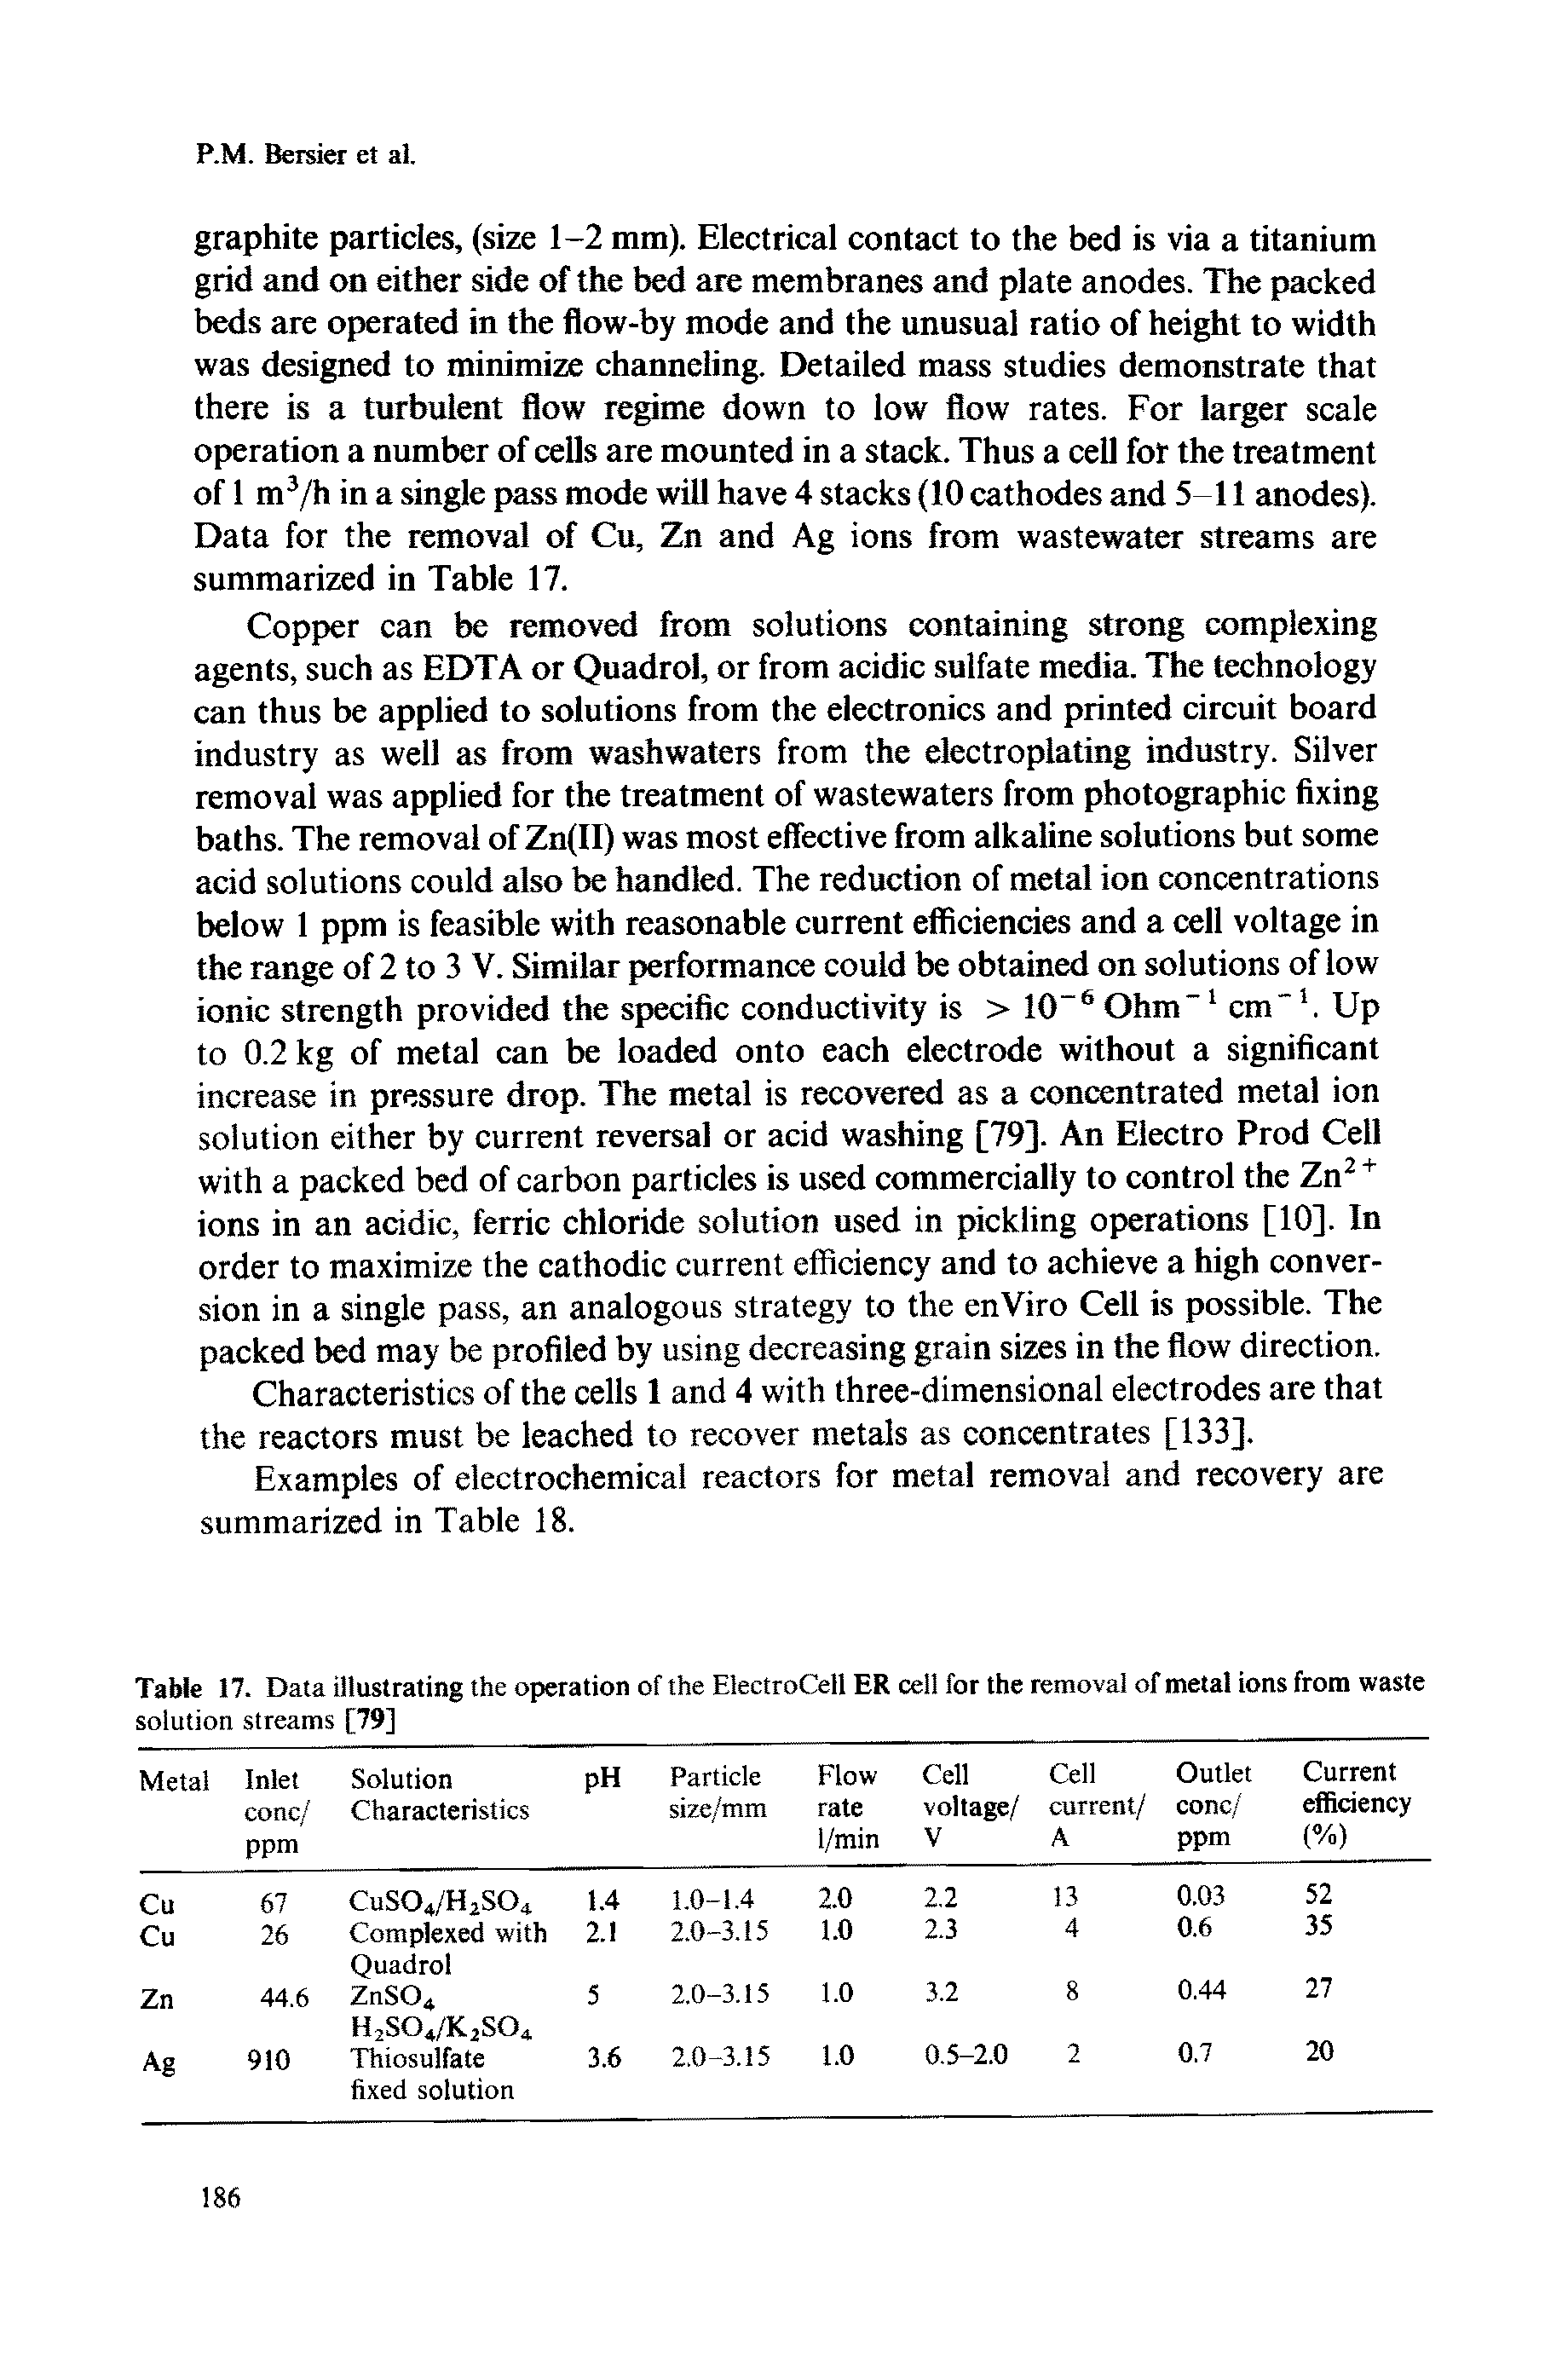 Table 17. Data illustrating the operation of the EleetroCell ER cell for the removal of metal ions from waste solution streams [79]...